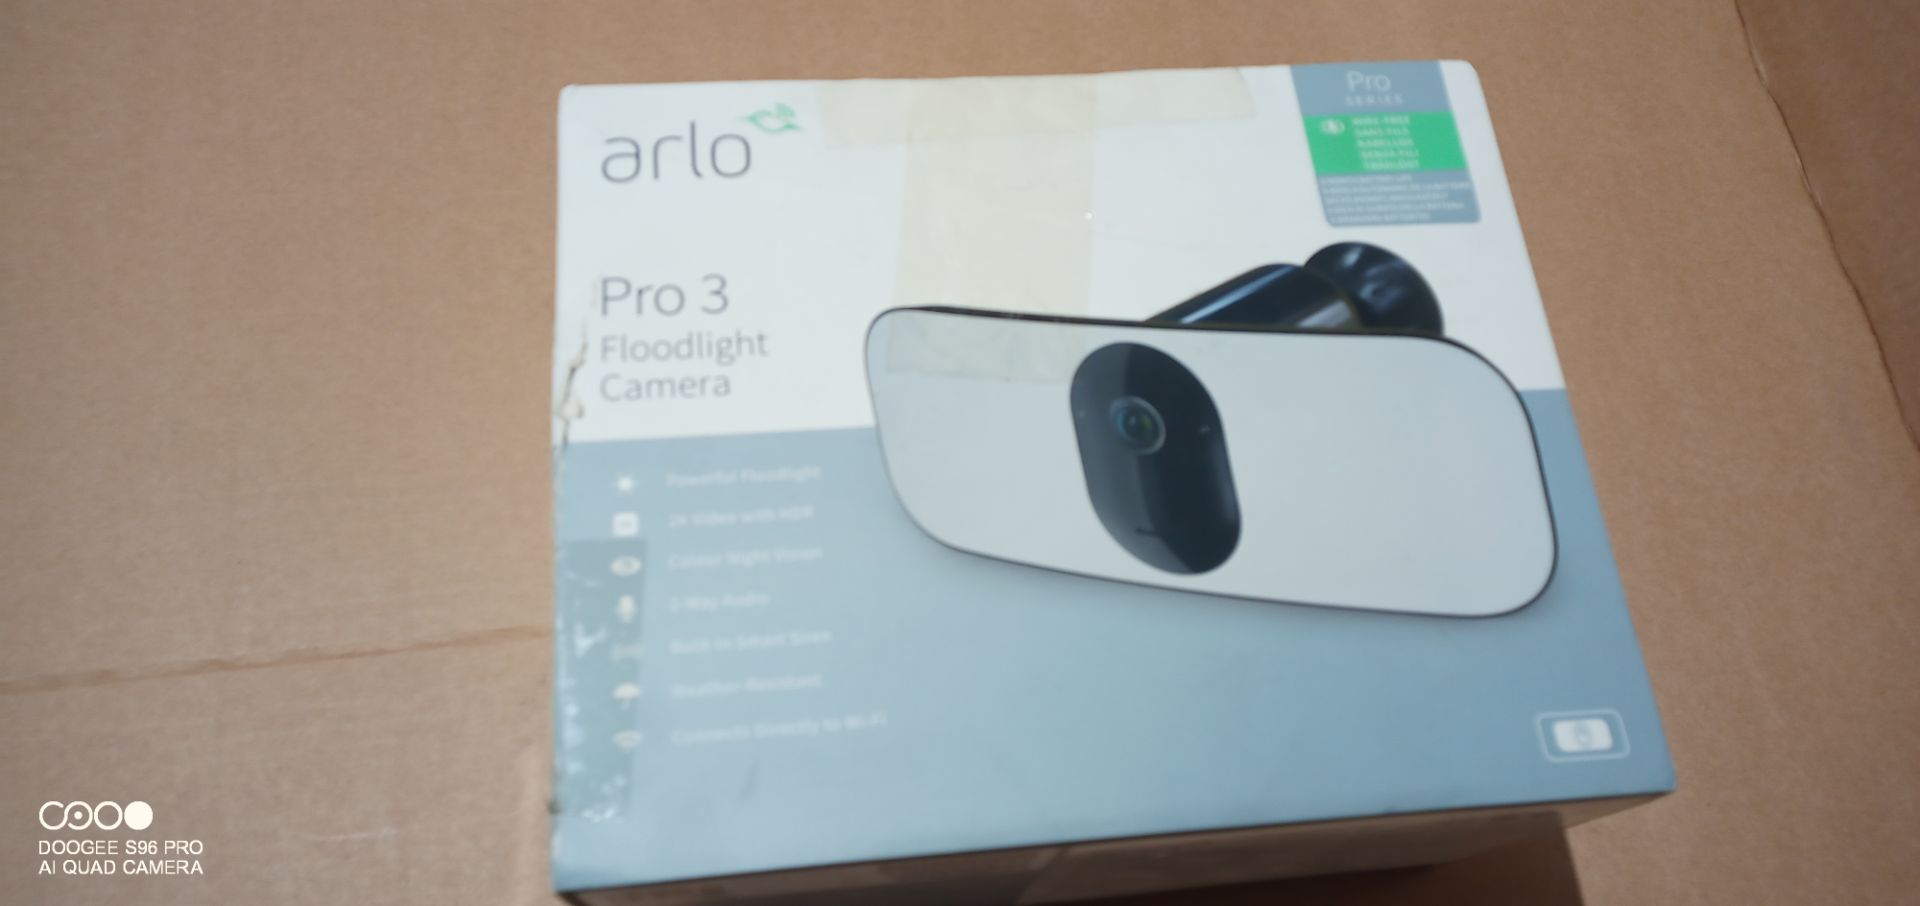 Arlo Pro 3 floodlight camera boxed unchecked rrp £149.99